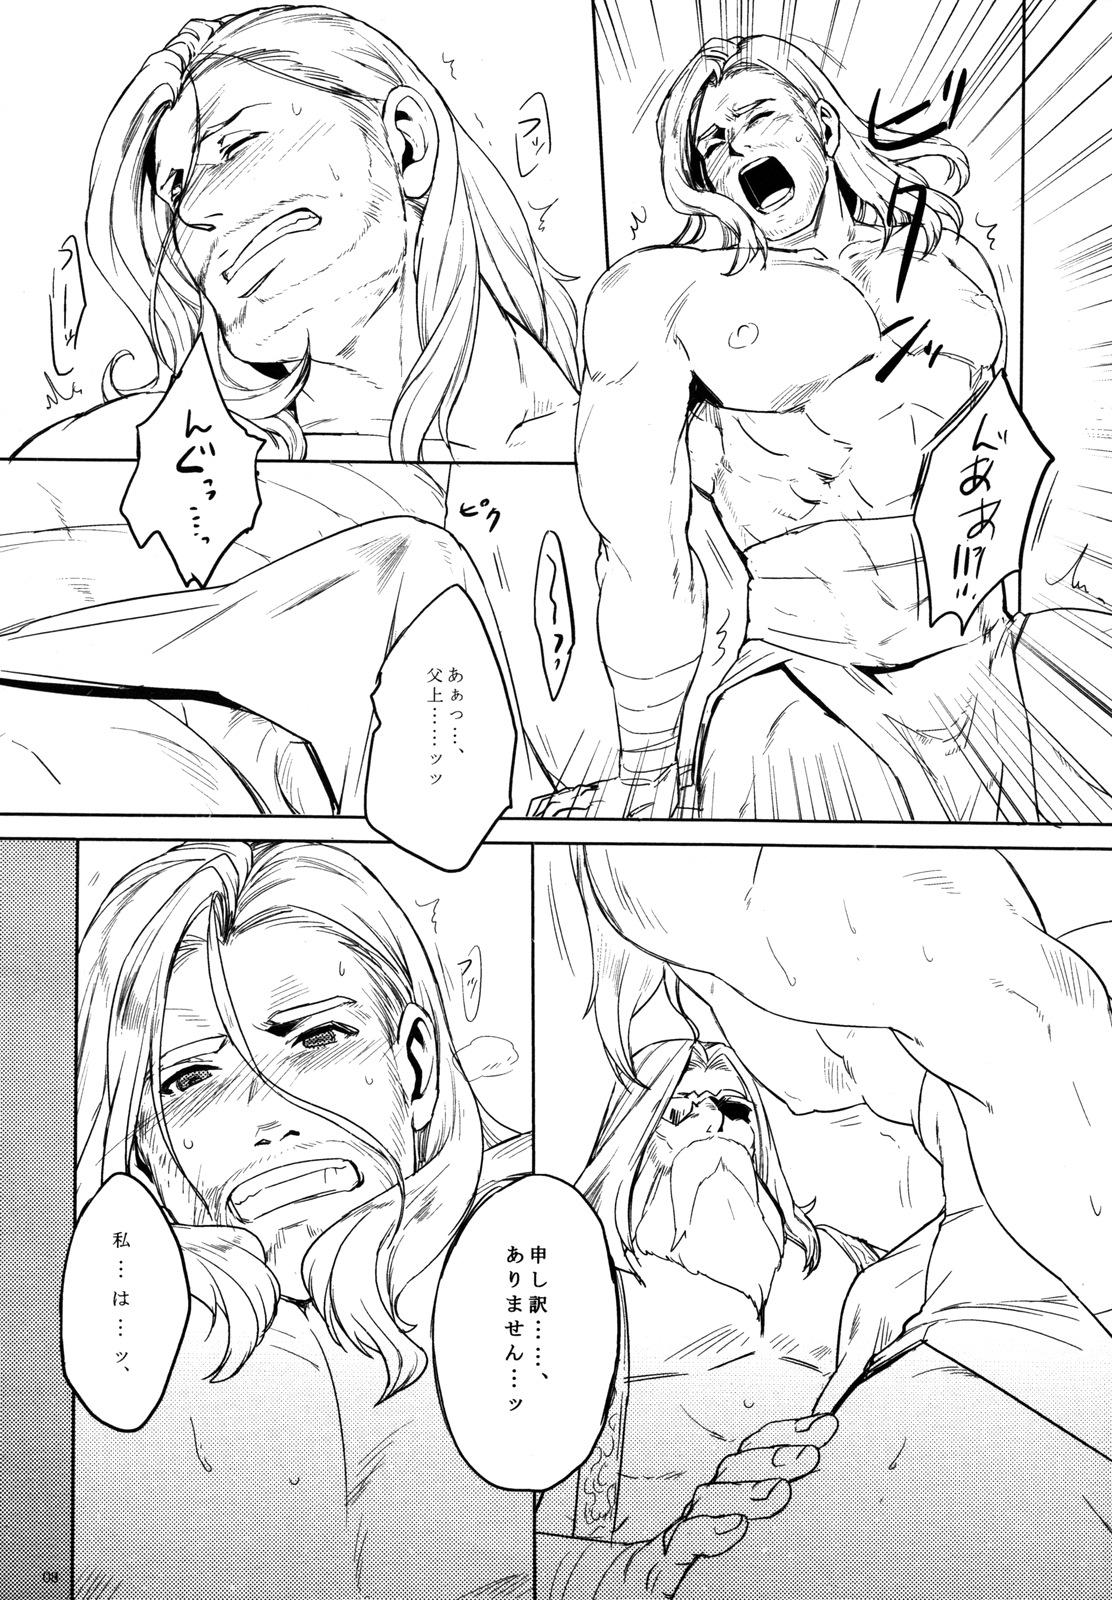 Close Up THY DEEDS - Avengers Thuylinh - Page 7